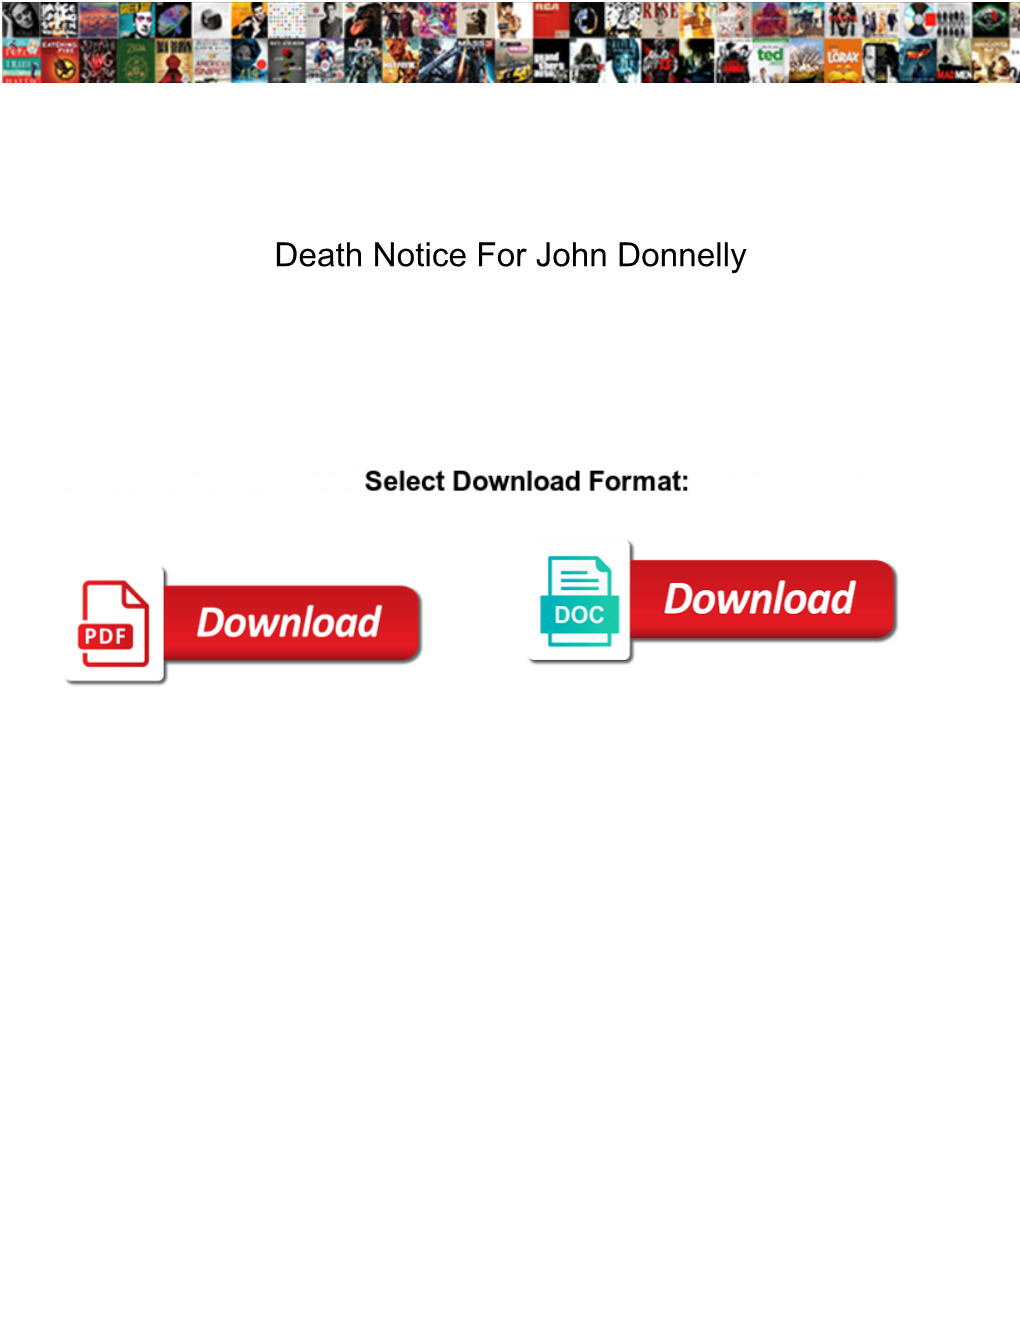 Death Notice for John Donnelly